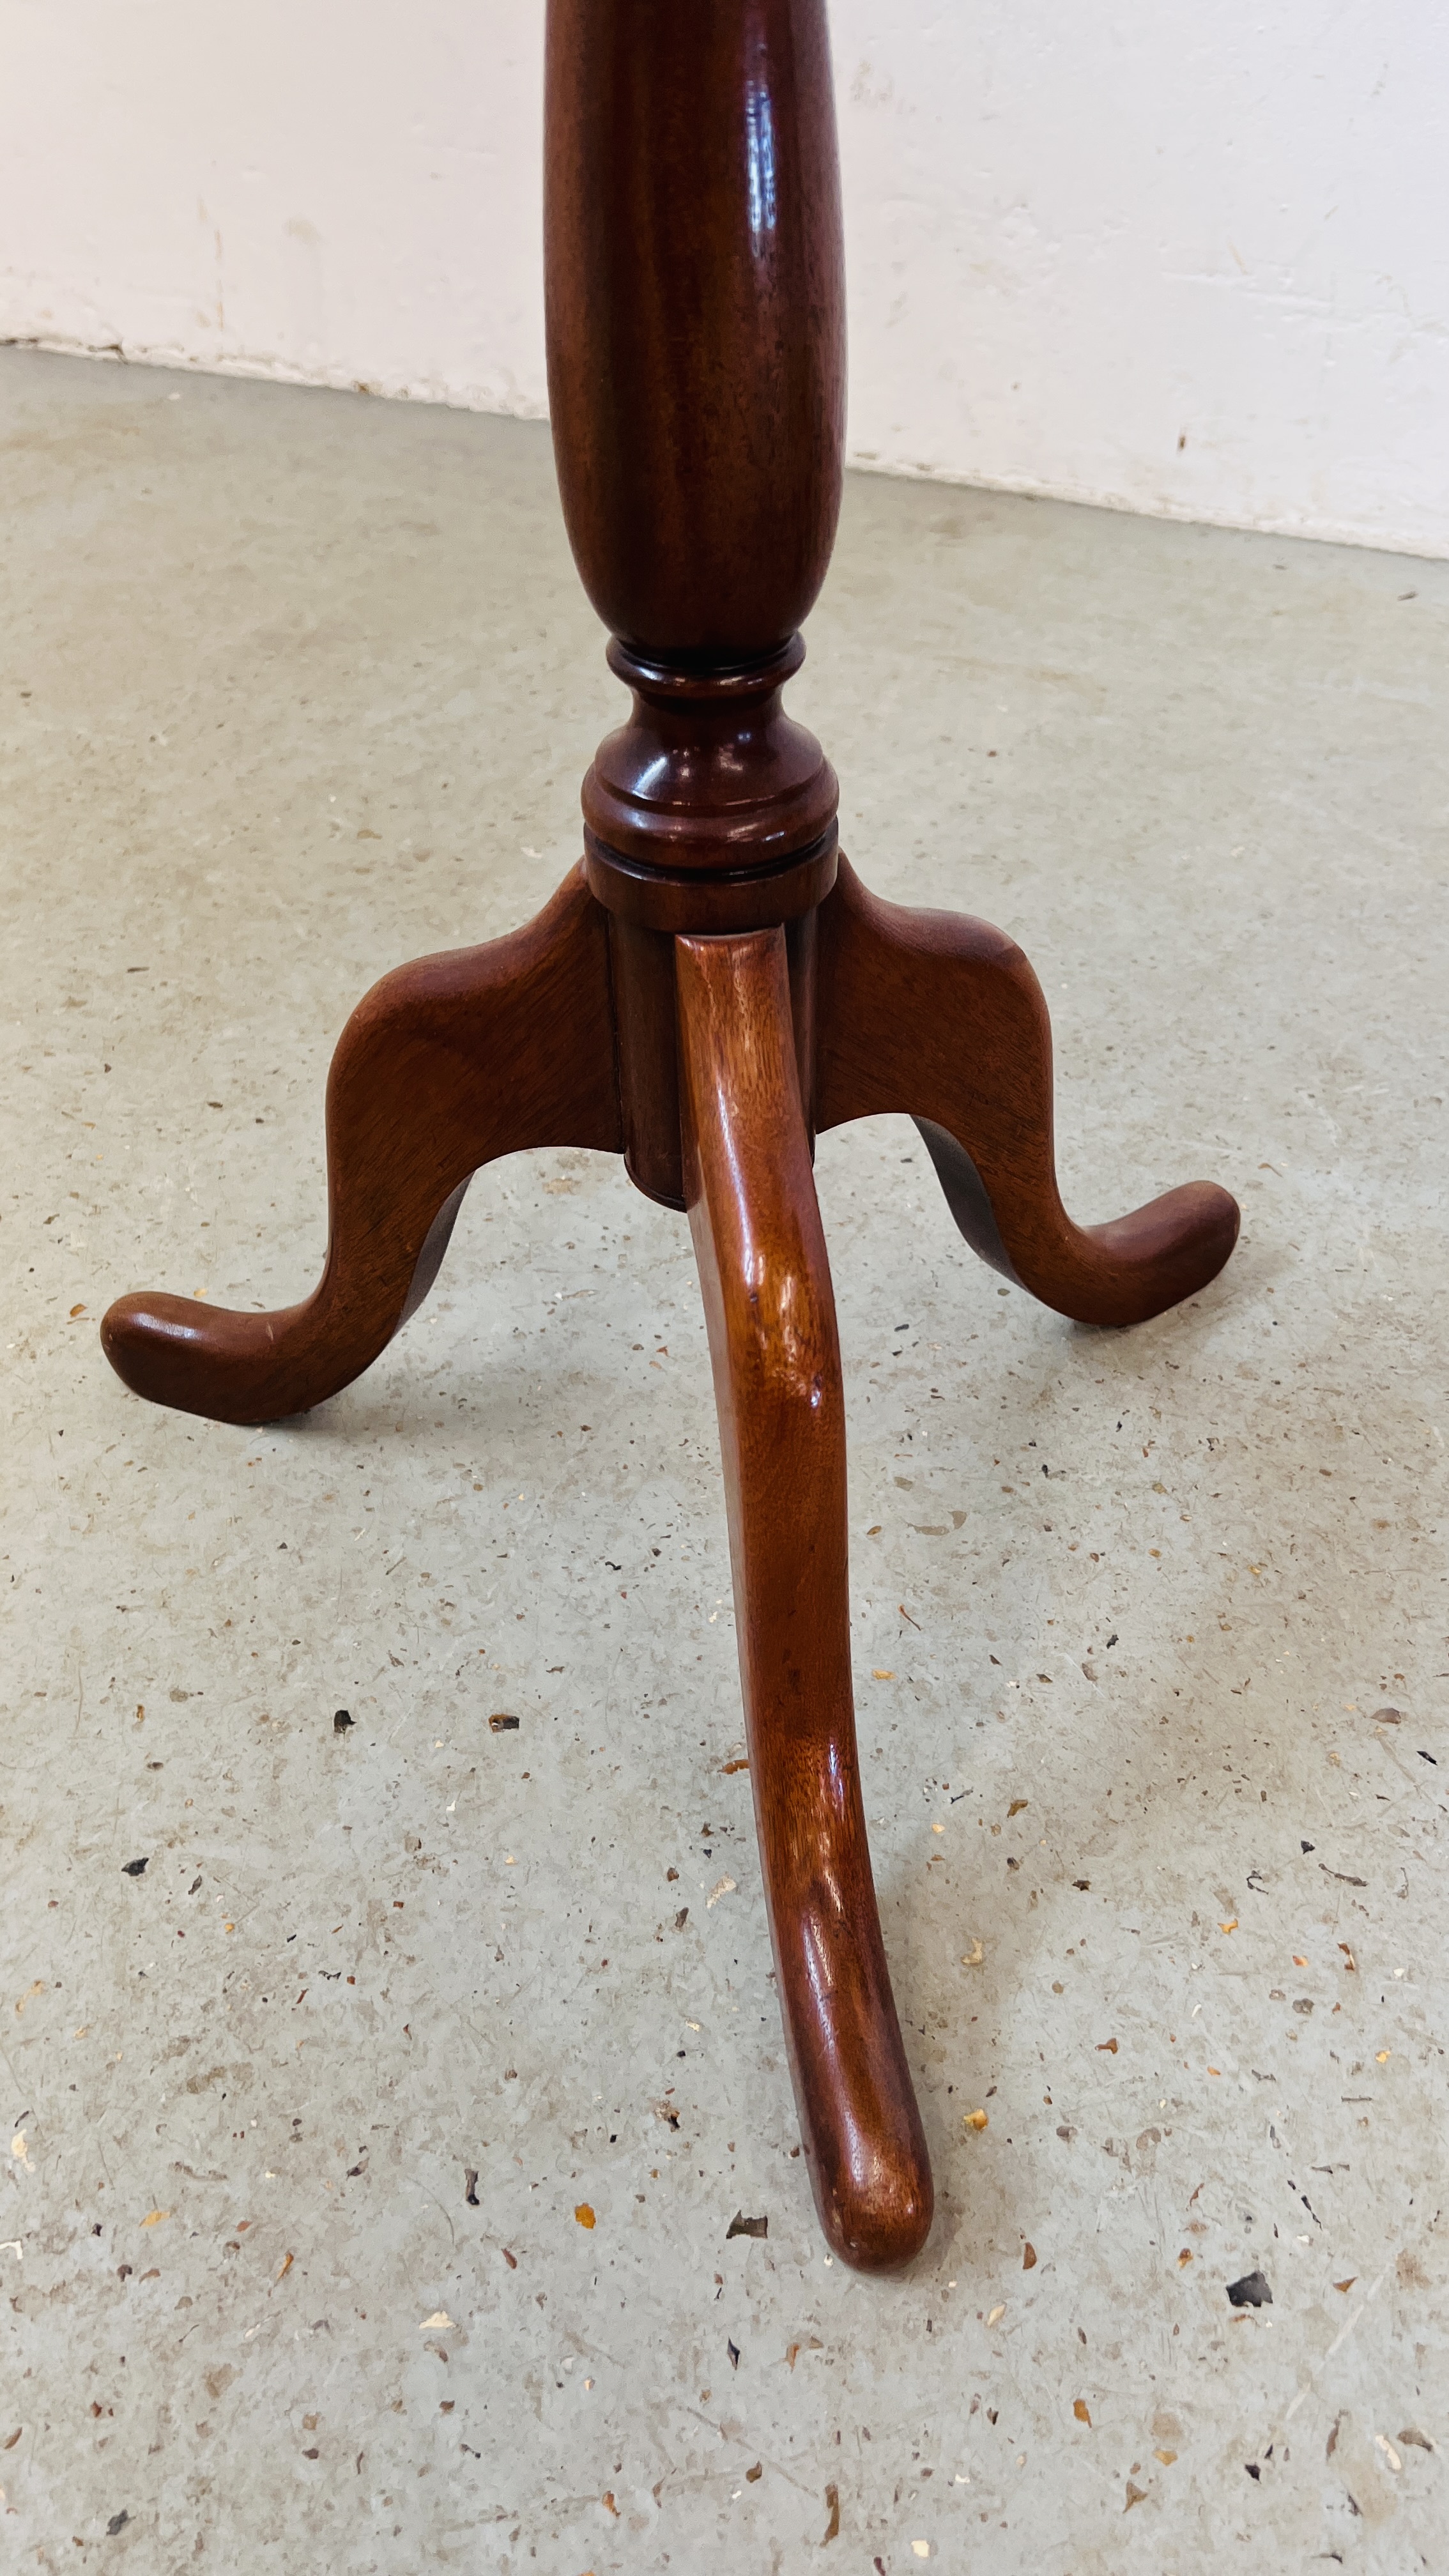 TWO GOOD QUALITY REPRODUCTION MAHOGANY PEDESTAL WINE TABLES, ONE WITH RIVEN COLUMN DETAIL. - Image 5 of 8